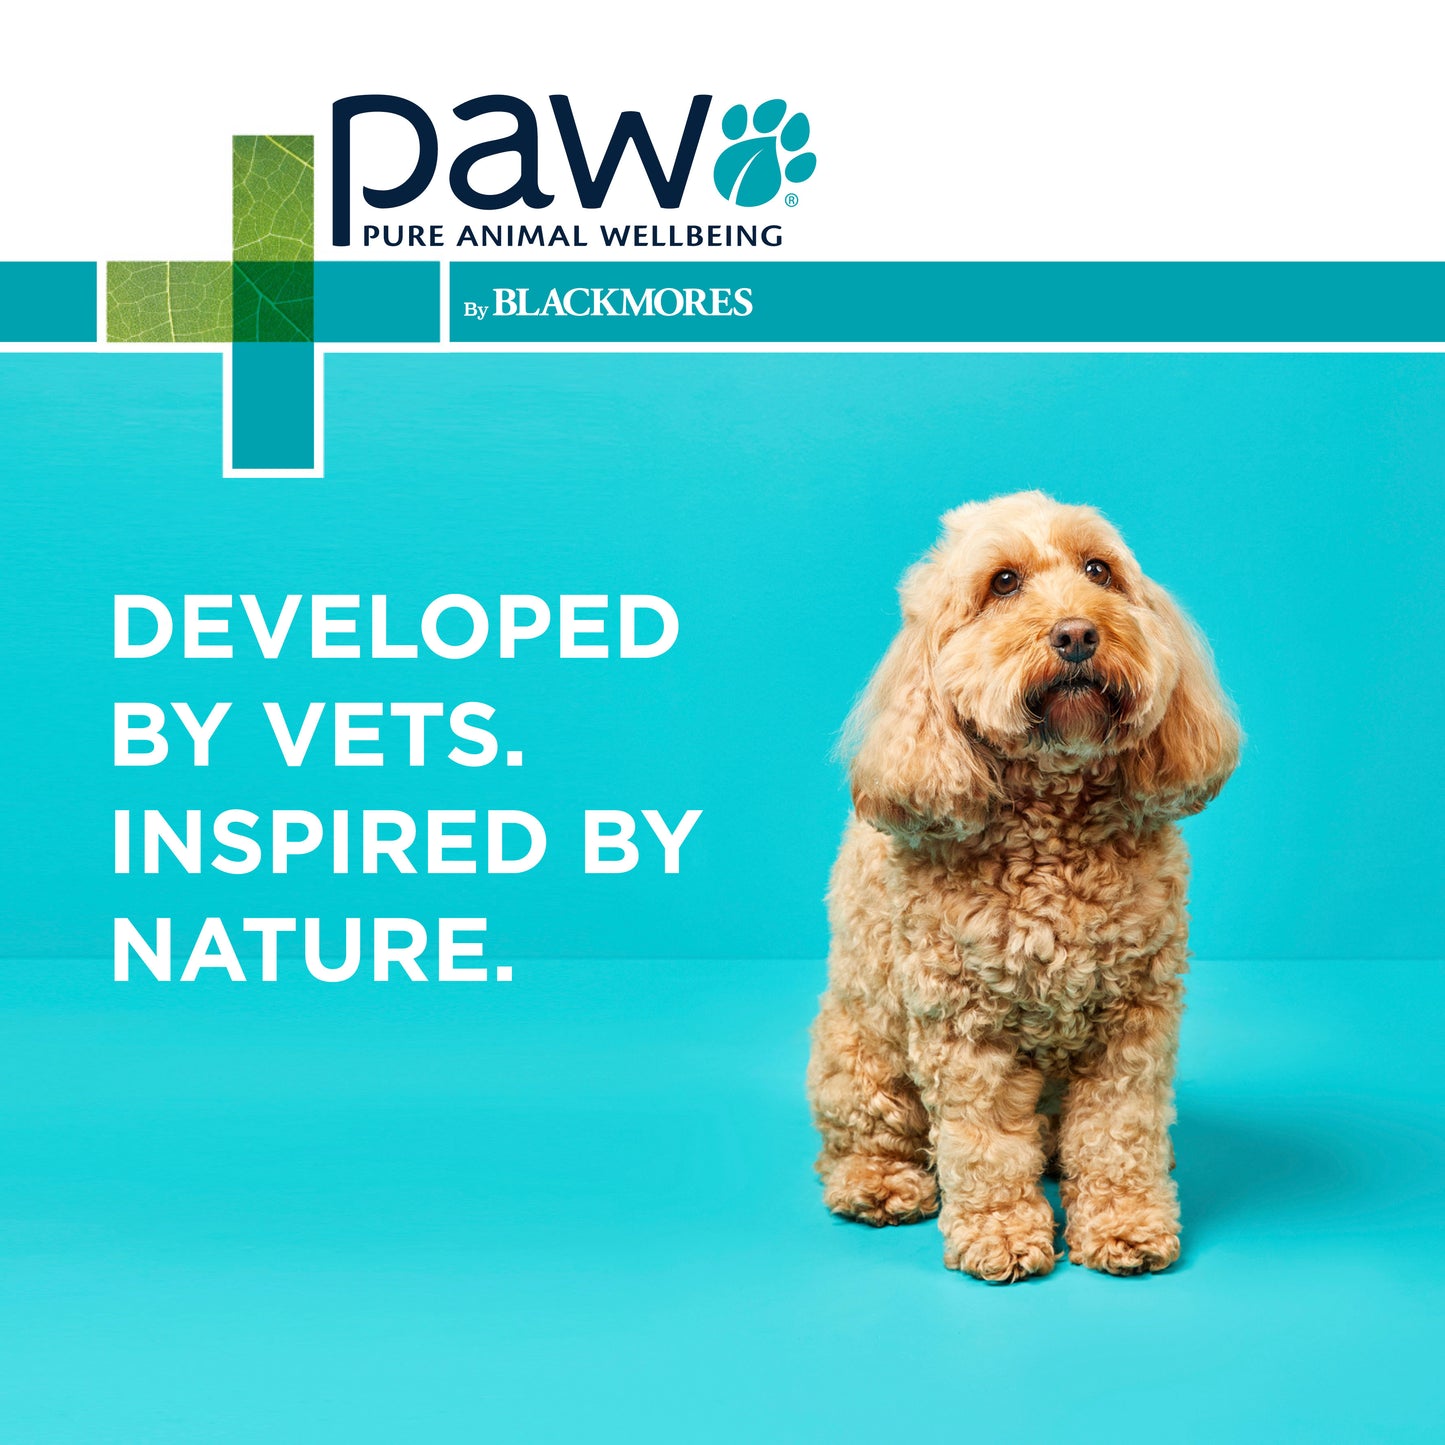 PAW Osteocare Joint Health Chews